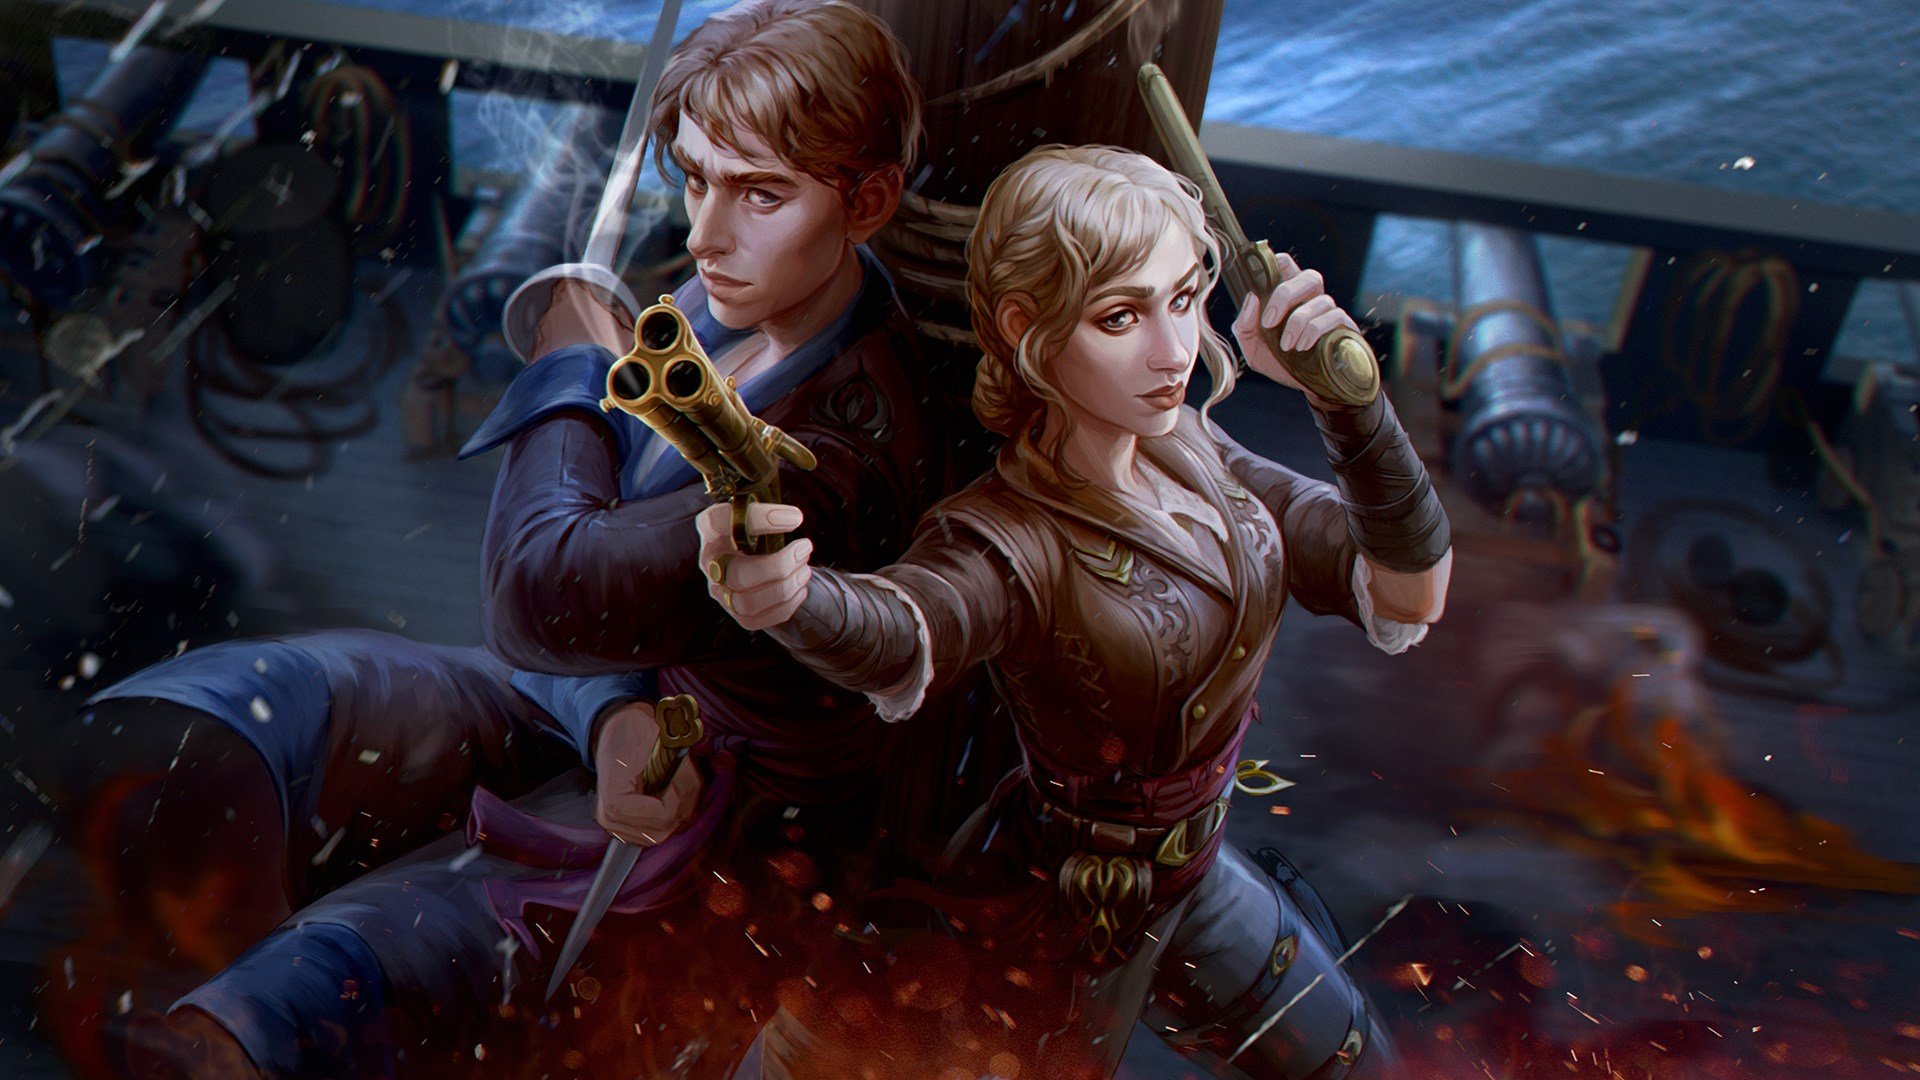 Uncharted Tides: Port Royal (Xbox One Version) cover image